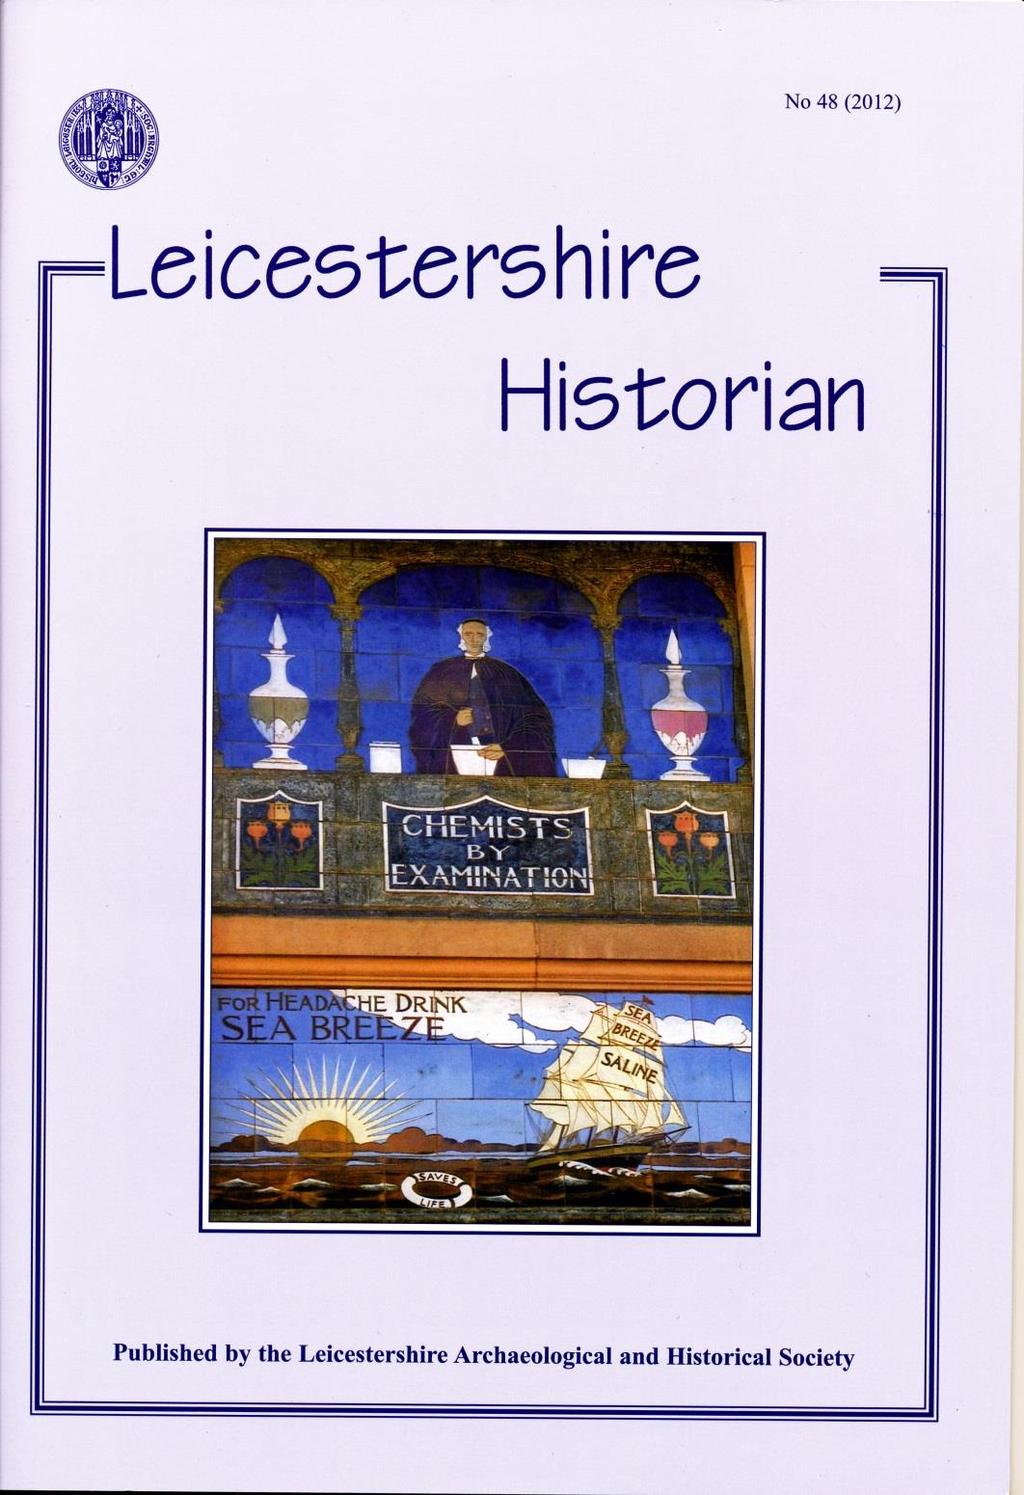 LAHS also produces The Leicestershire Historian, which first appeared as the annual publication of the Leicestershire Local History Council in 1967, but when